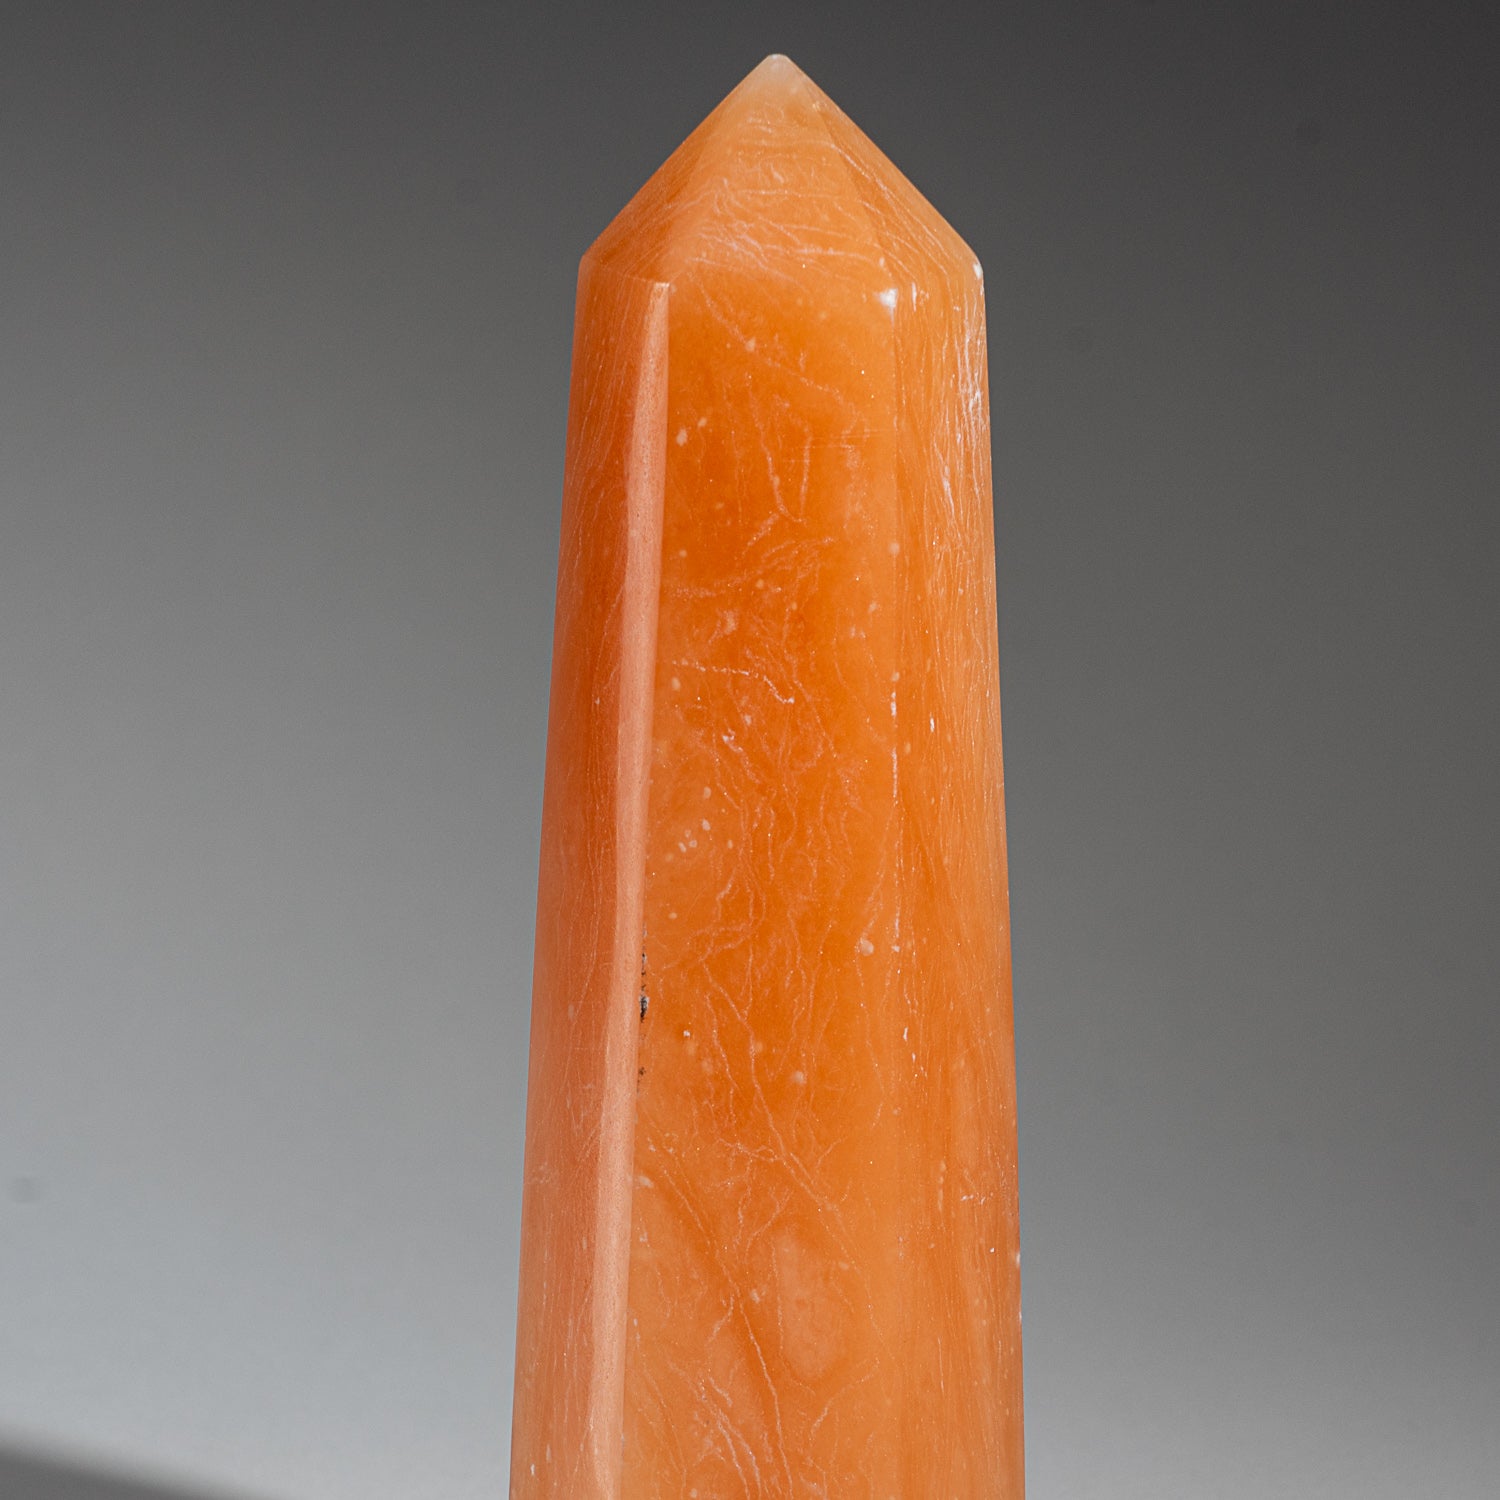 Genuine Polished Orange Selenite Point from Morocco (1.7 lbs)